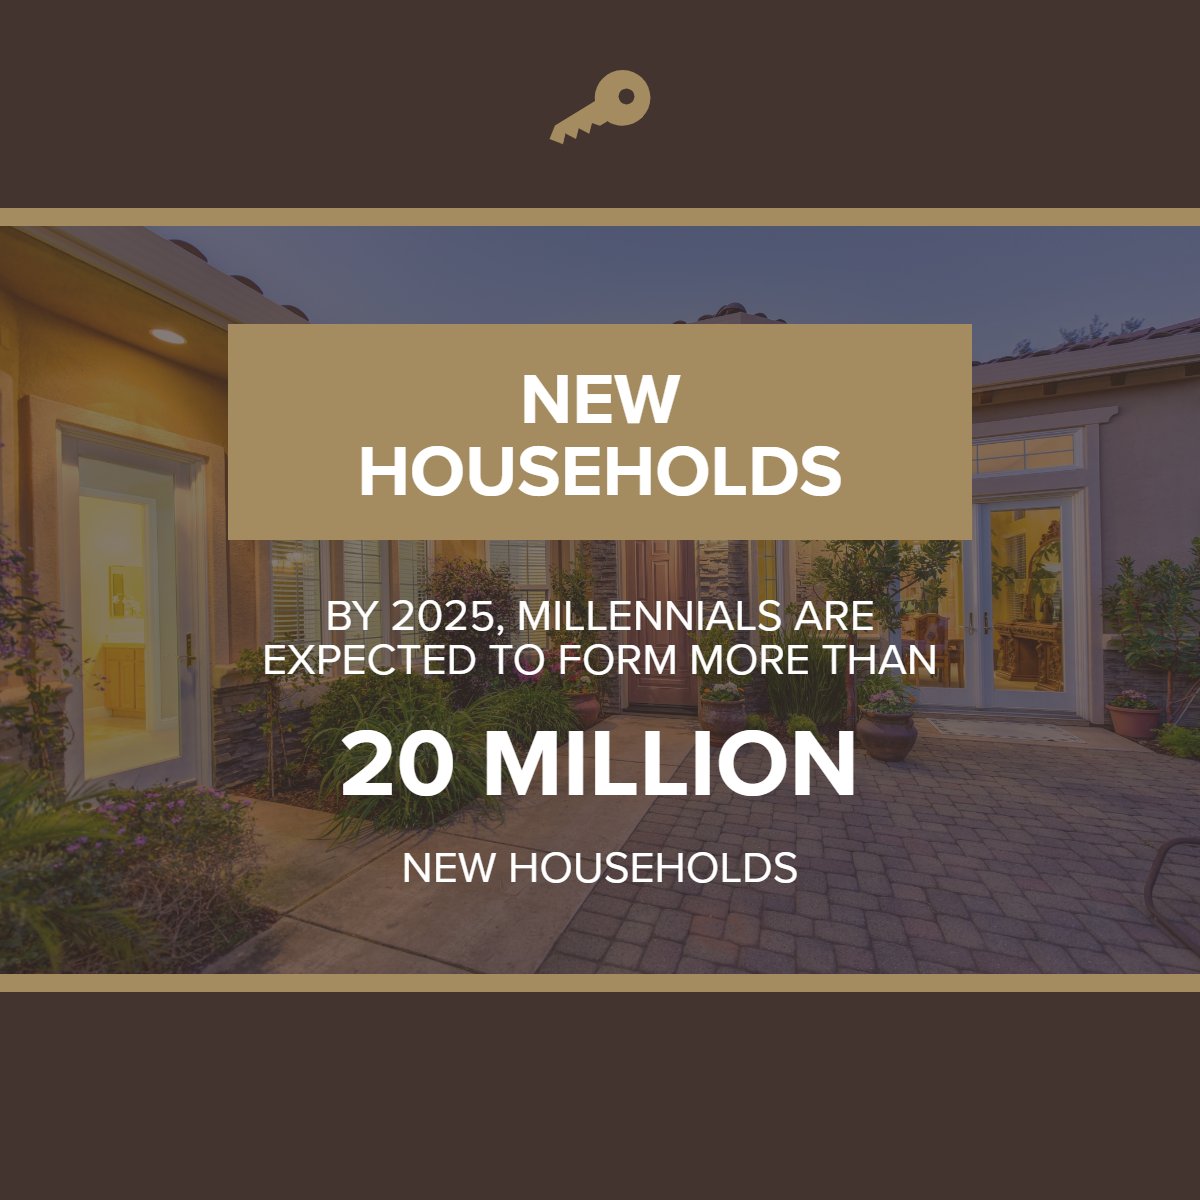 Did you know? 

By 2025, millennials are expected to form more than 20 MILLION new households. 👀

#millennial    #realestatemarket    #realestatestyle    #realestatefacts    #coolfacts
#Reno #RealEstate #Newhouse #Kitchenreno #FlooringReno #RenoRedo